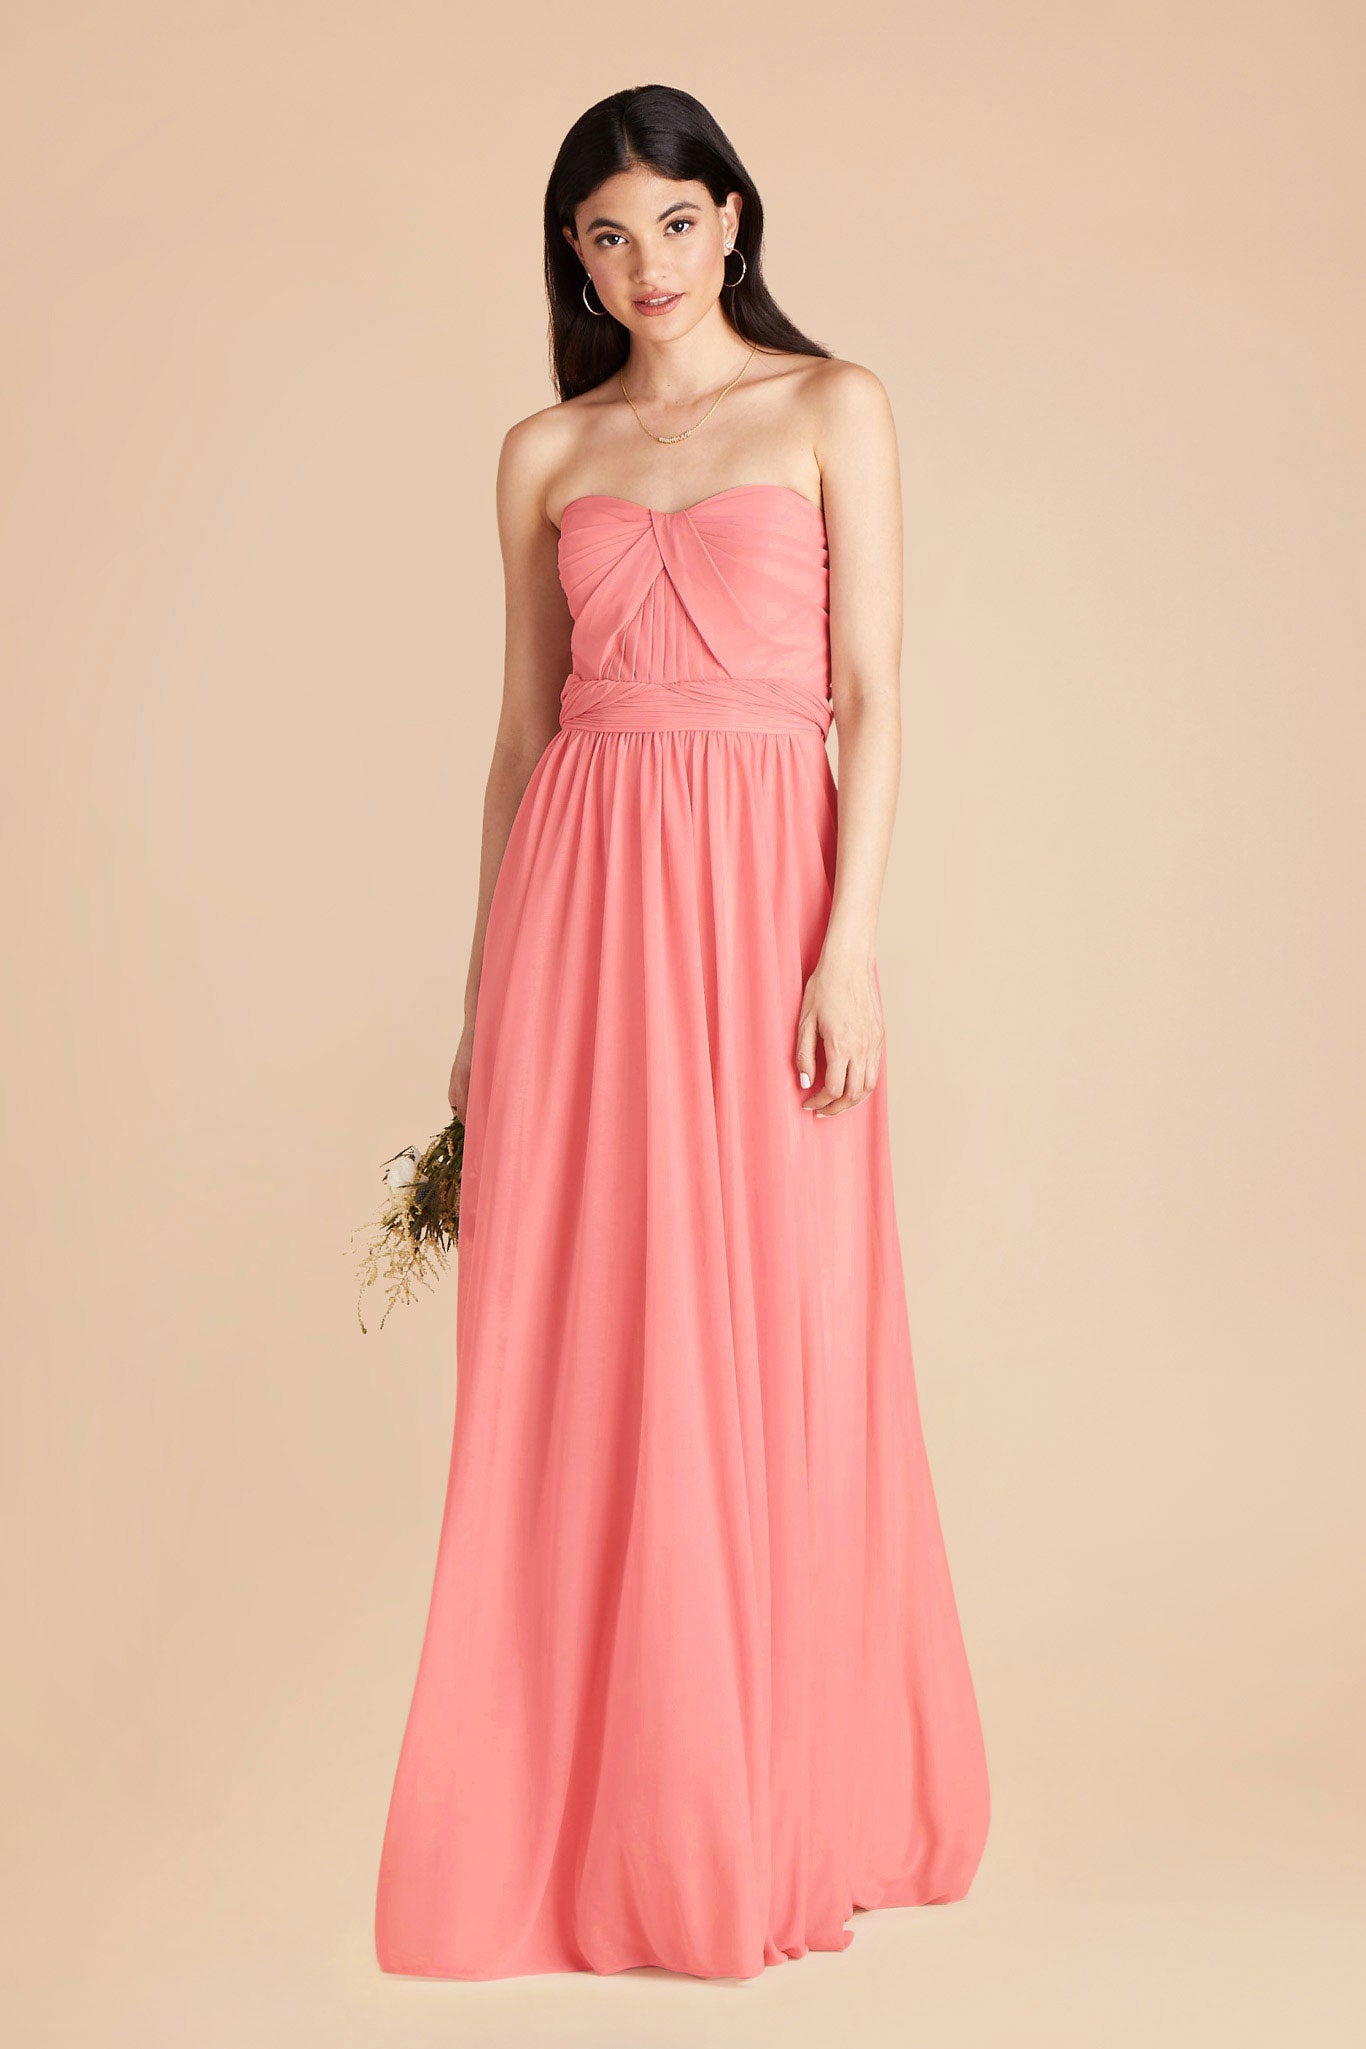 Coral Pink Grace Convertible Dress by Birdy Grey